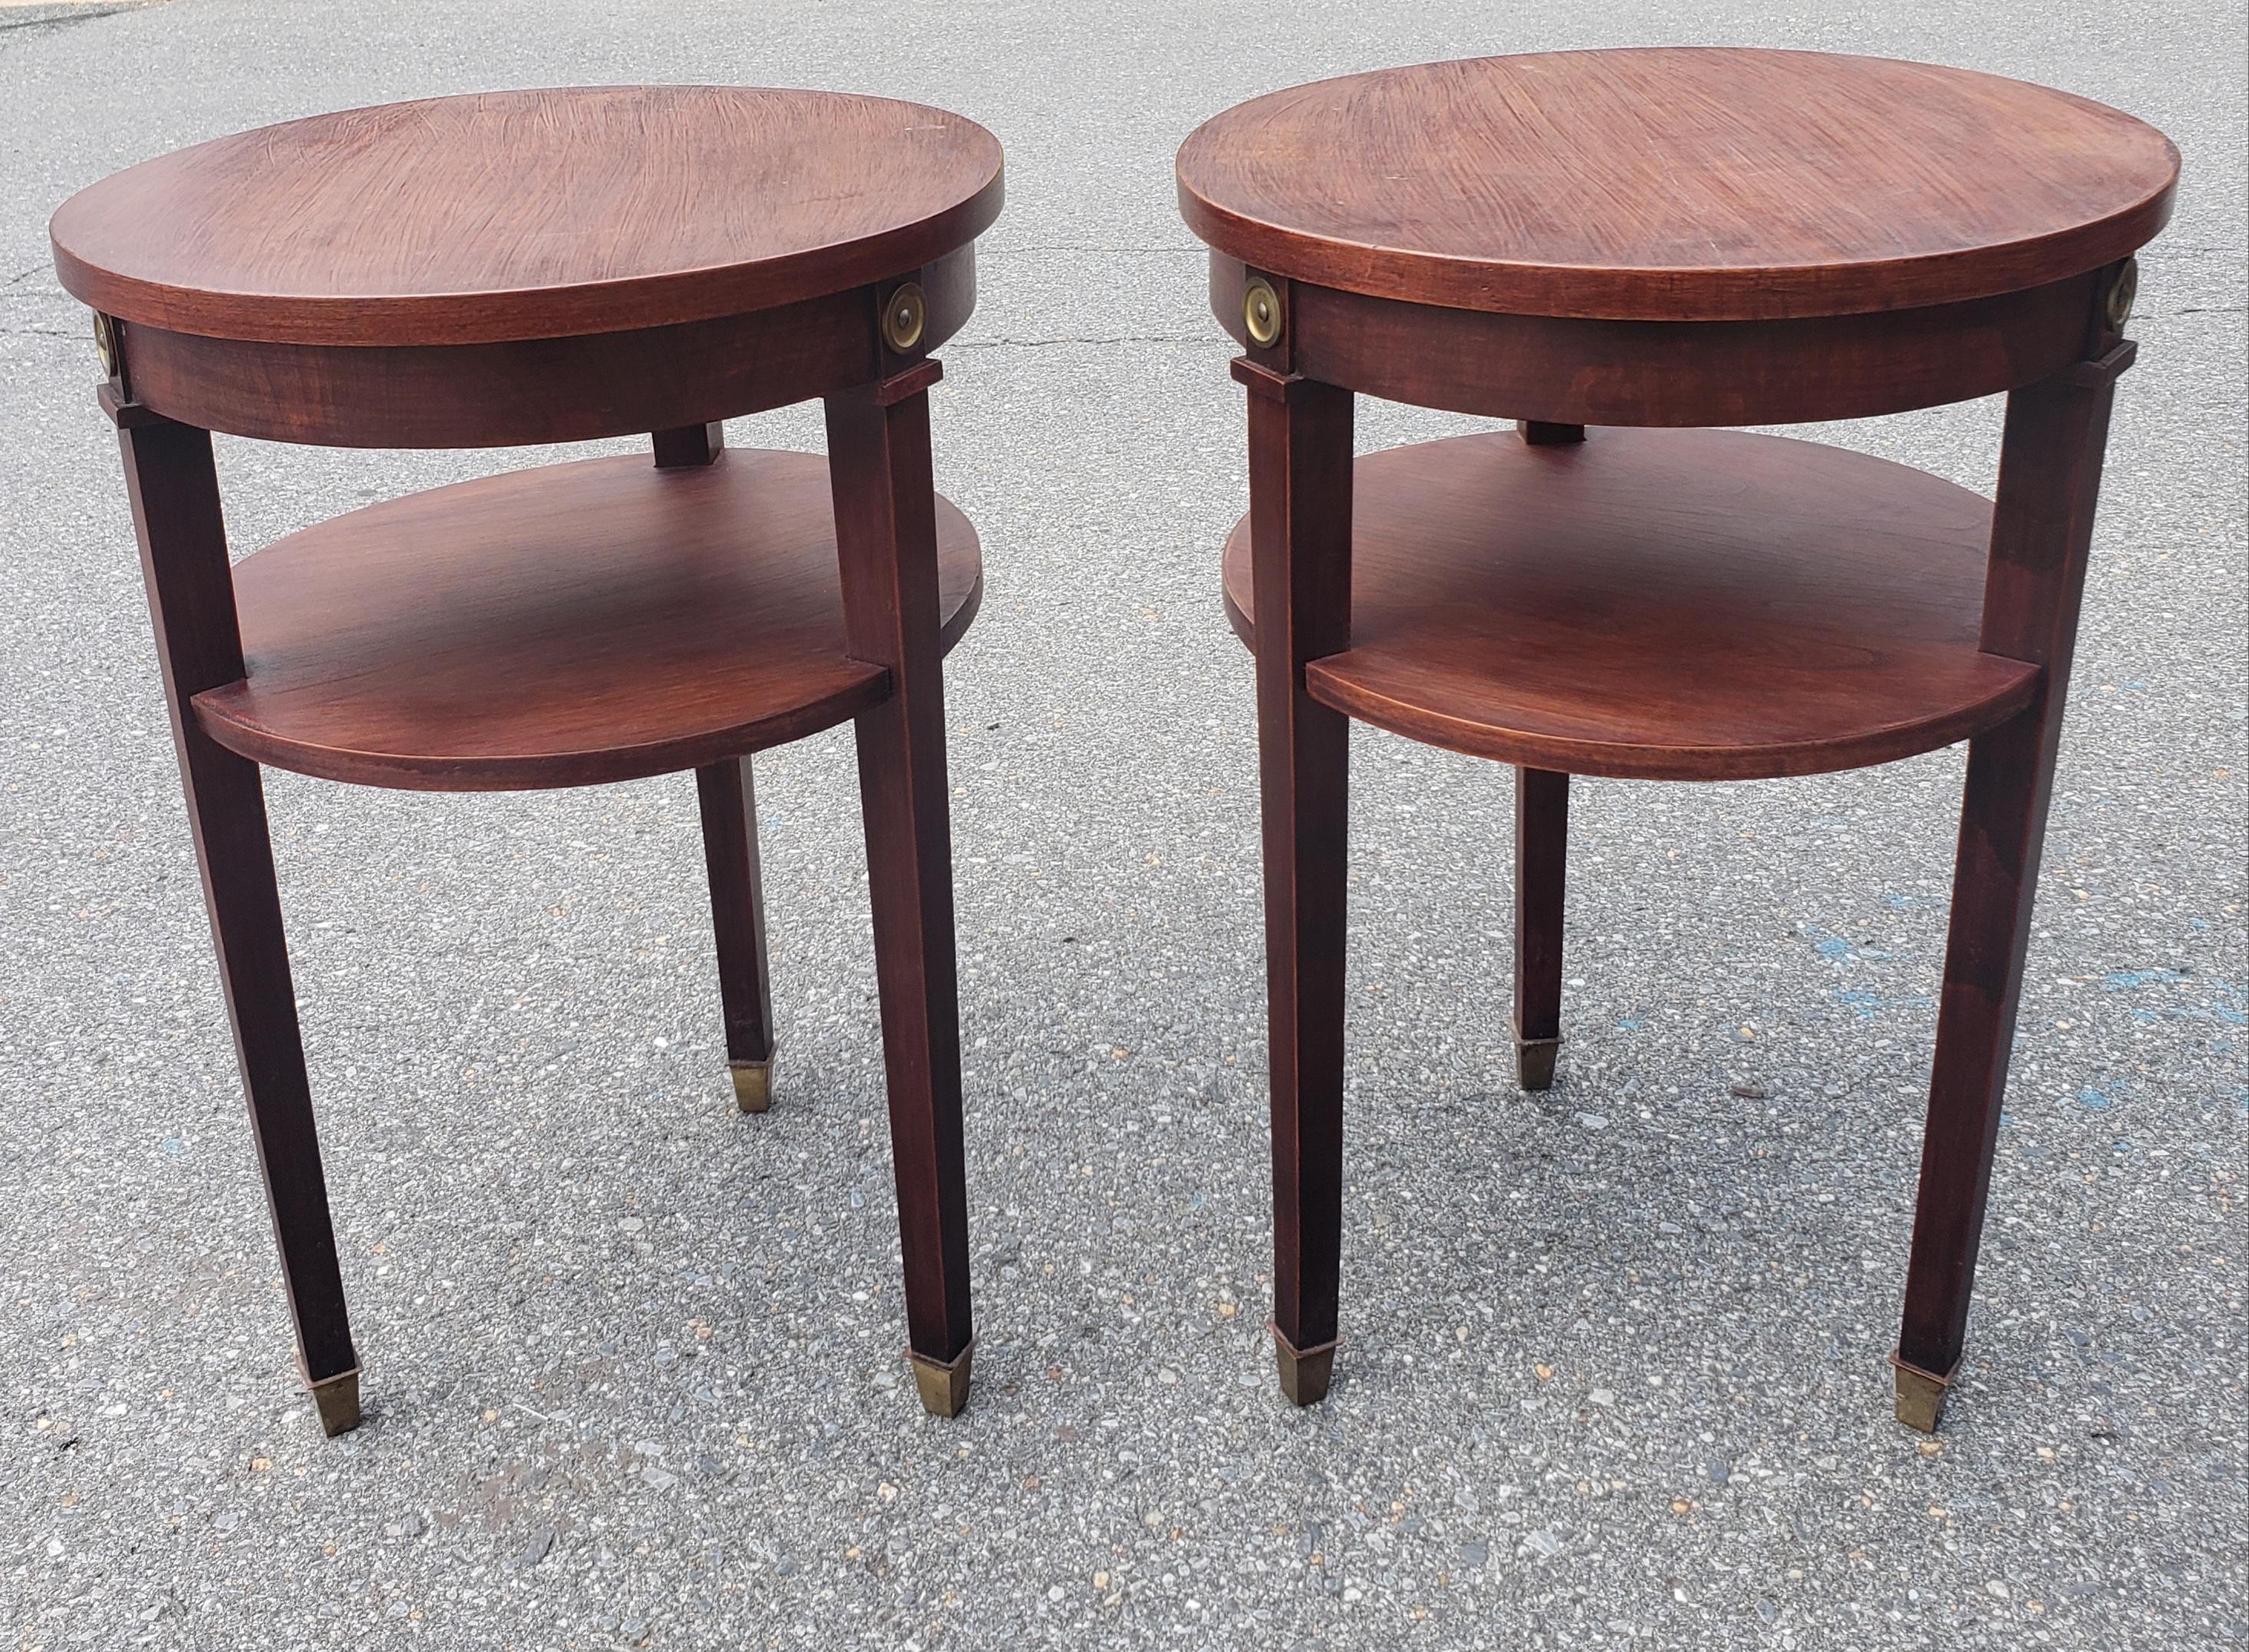 1950s Refinished Mahogany 2-Tier Round Candle Stand with Brass Capped Legs, Pair For Sale 1